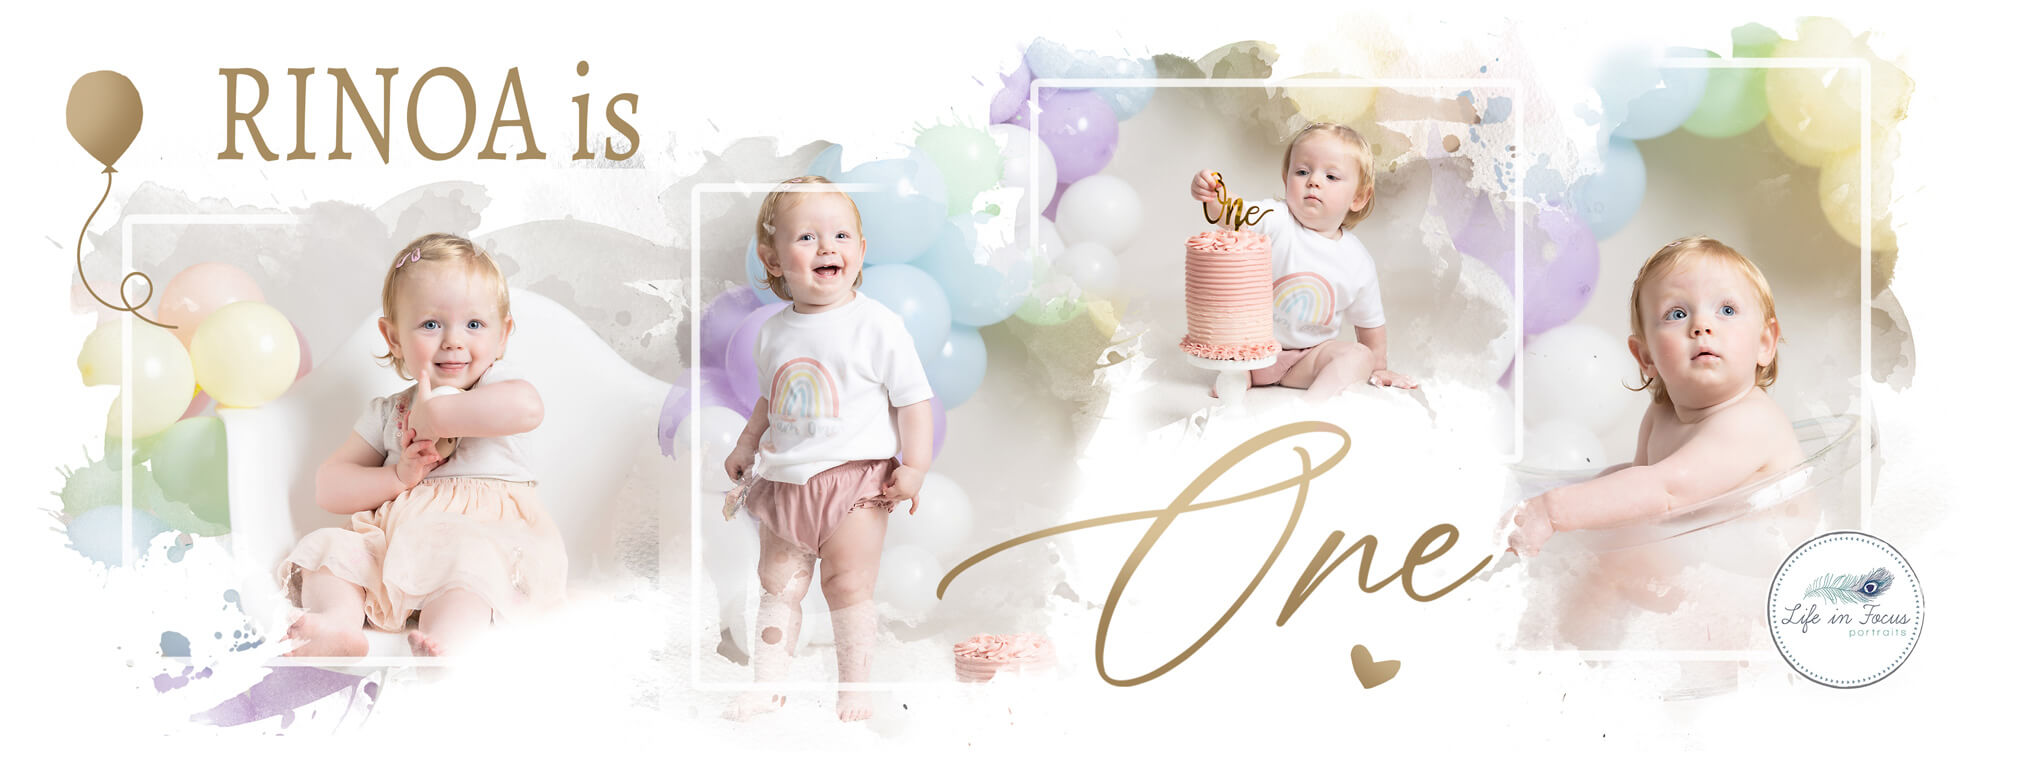 photos of baby girl with birthday cake and balloons during cake smash photo session